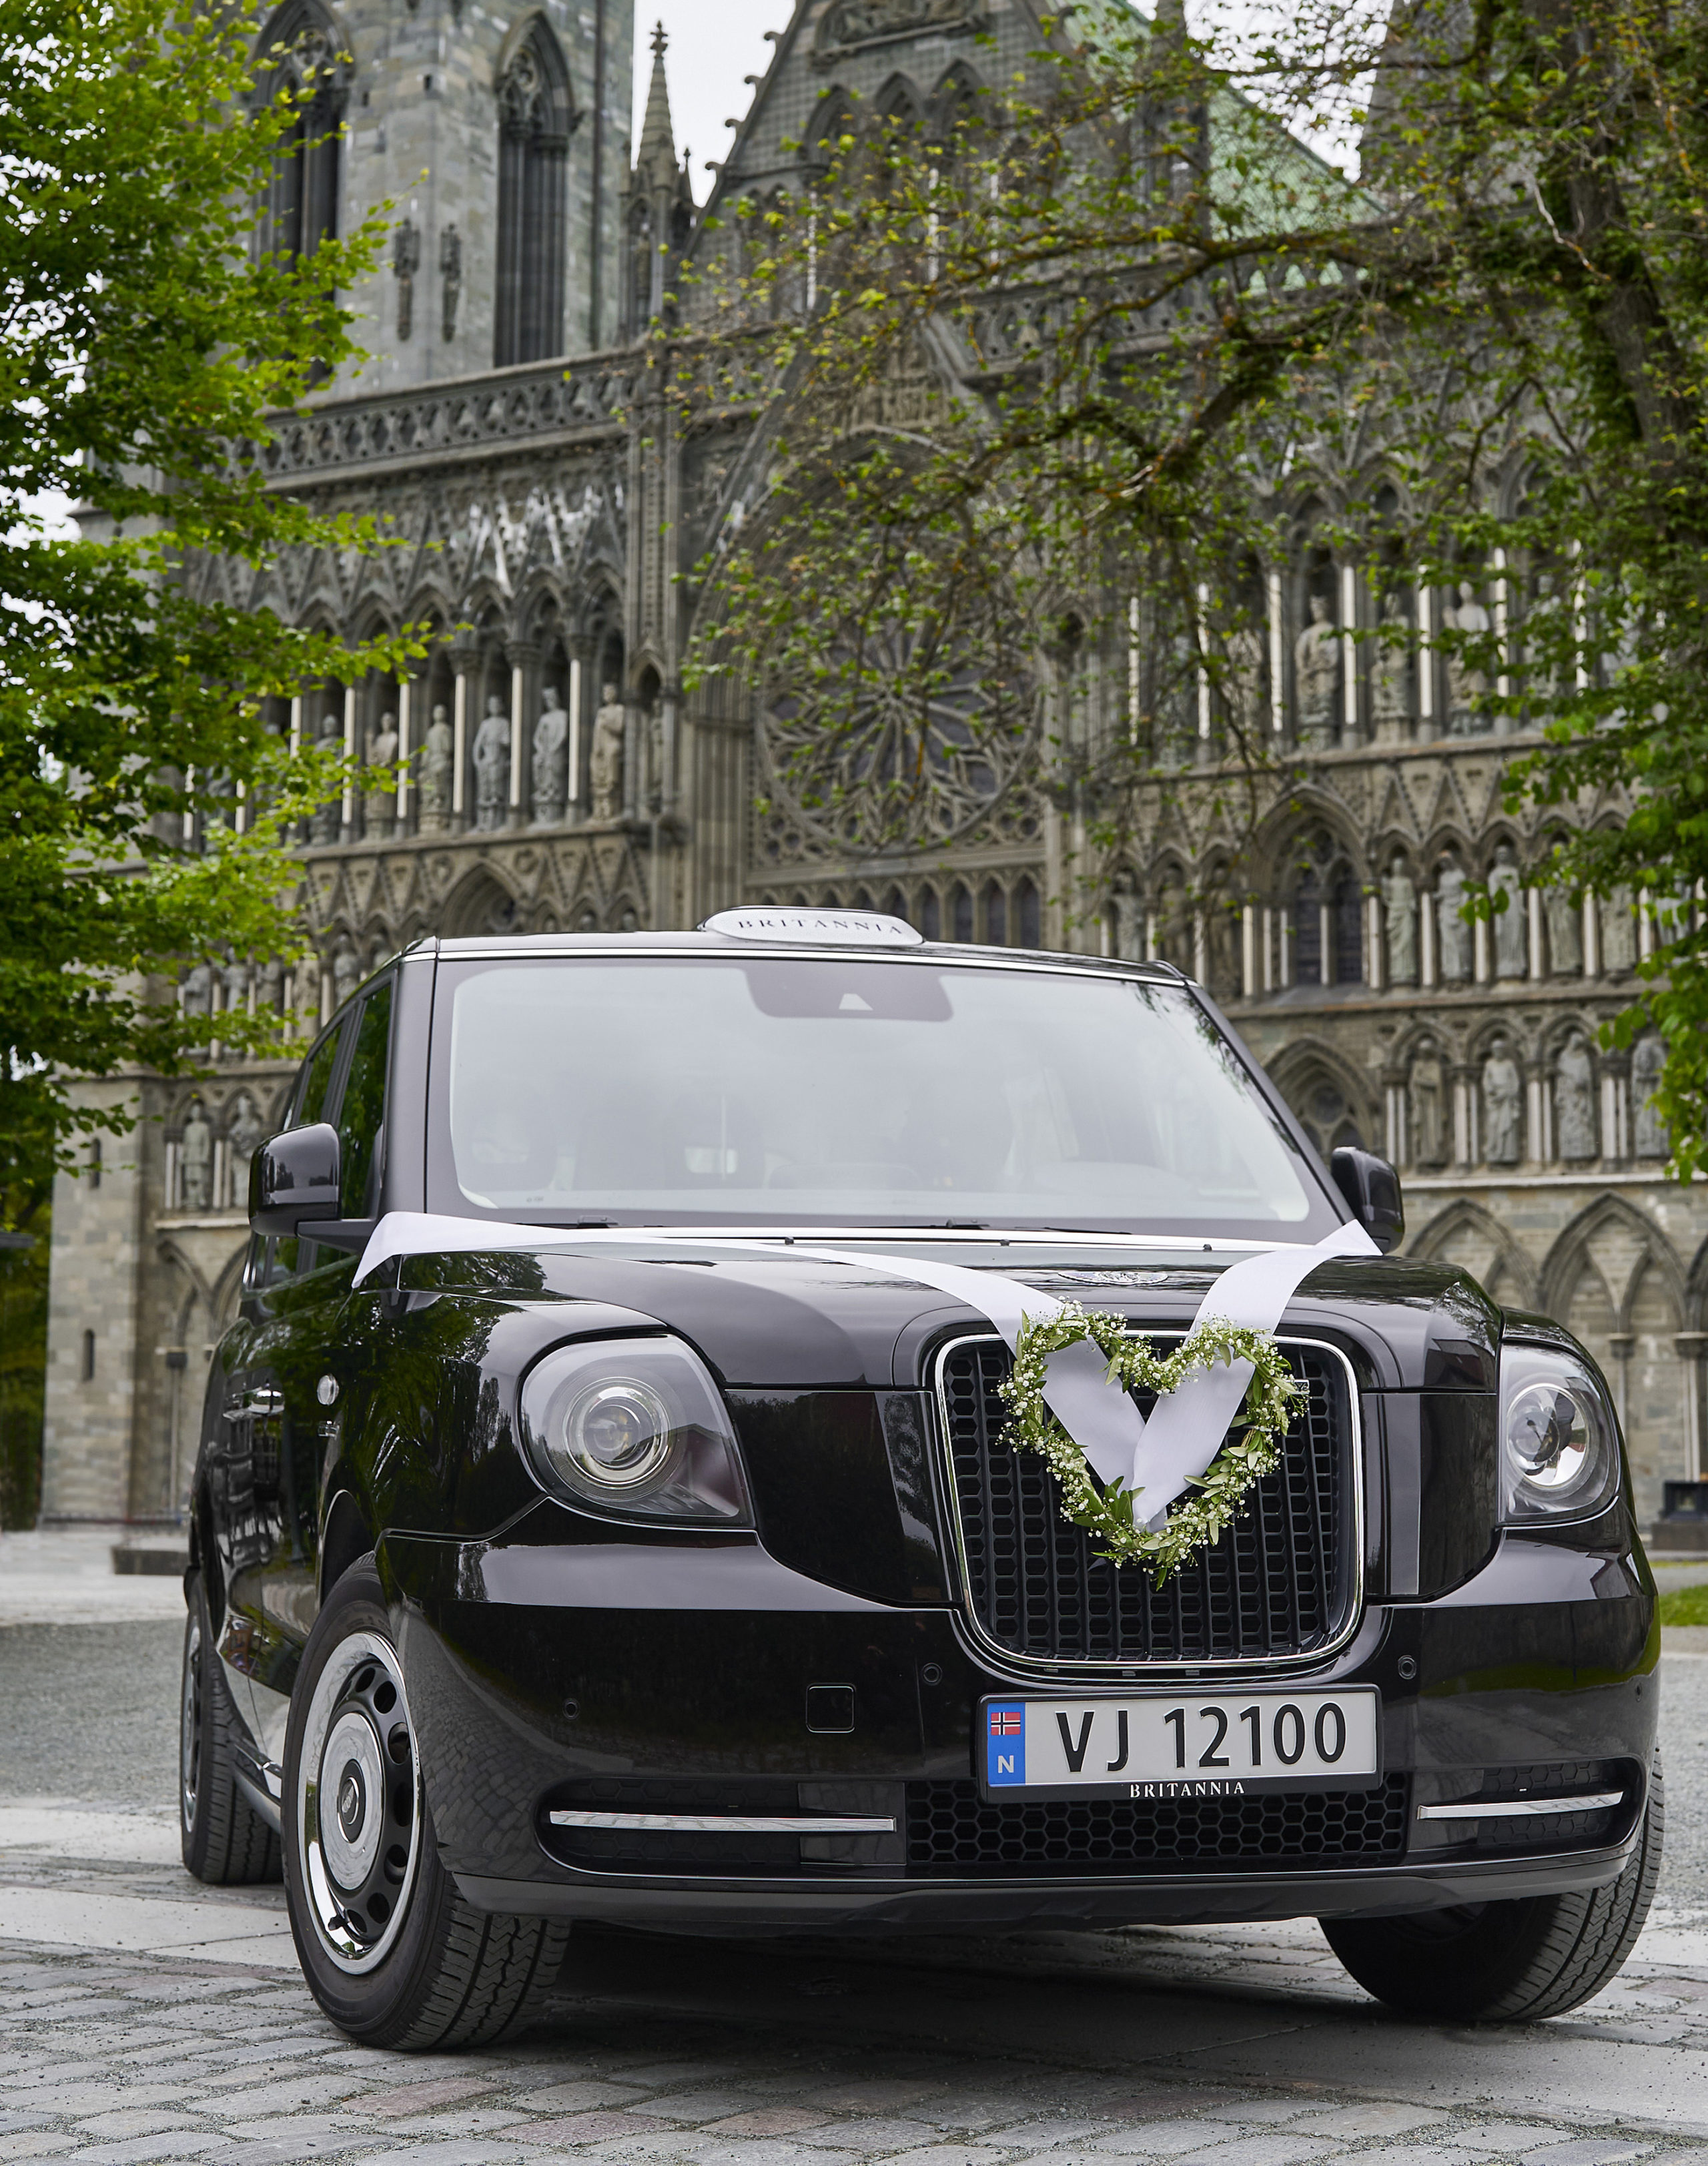 Britannia Hotel electric London black cab, decorated for a wedding, pictured outside Nidaros Cathedral in Trondheim